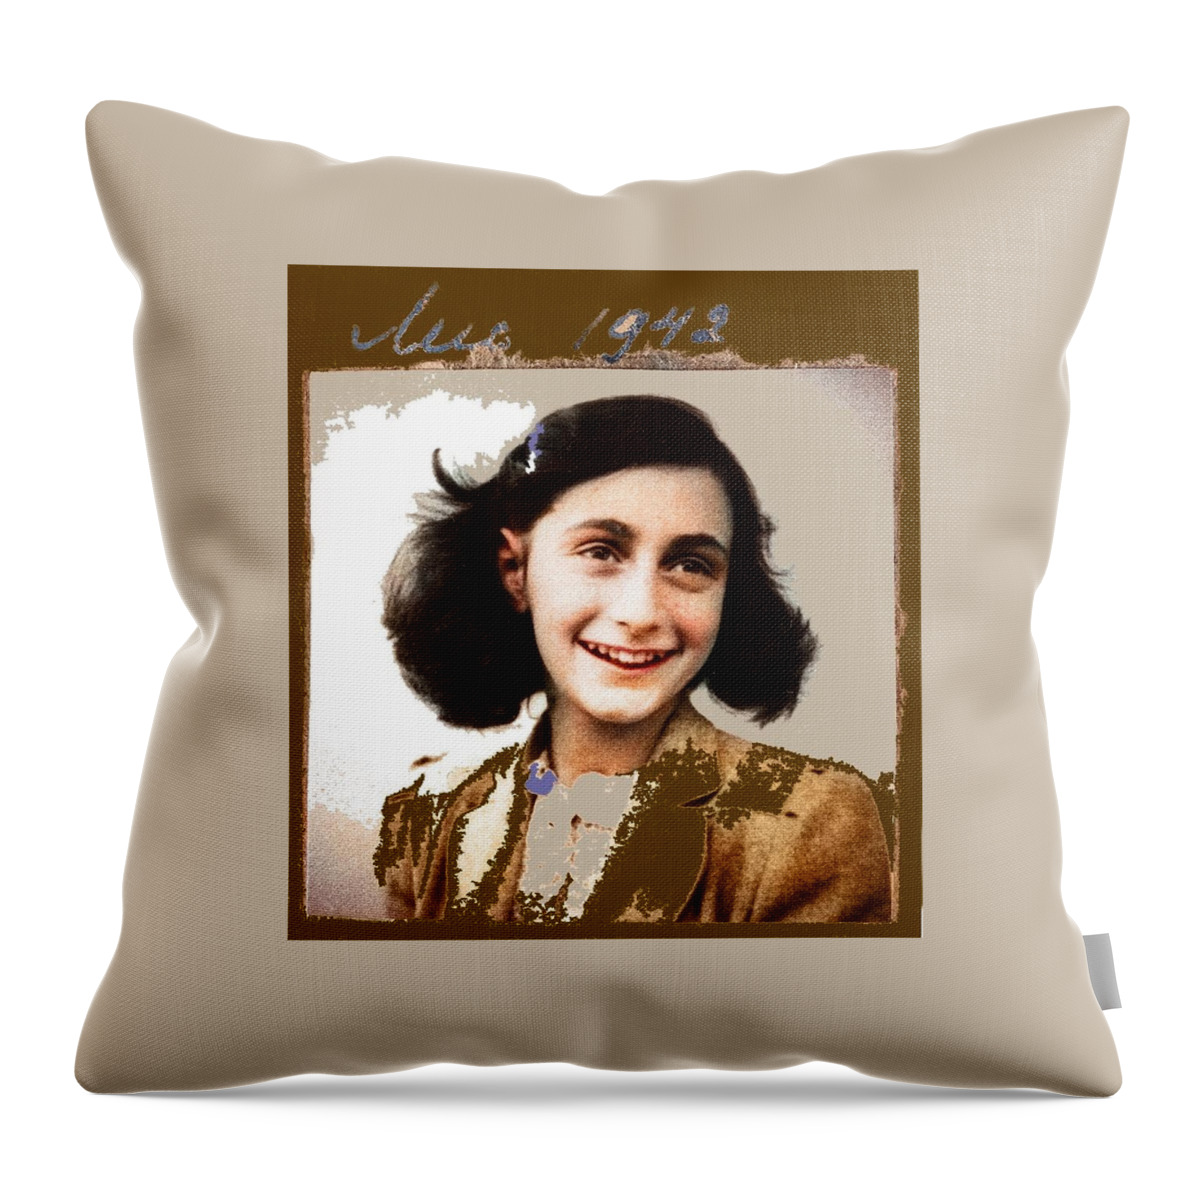 Anne Frank 1942 Throw Pillow featuring the photograph Anne Frank 1942-2015 by David Lee Guss